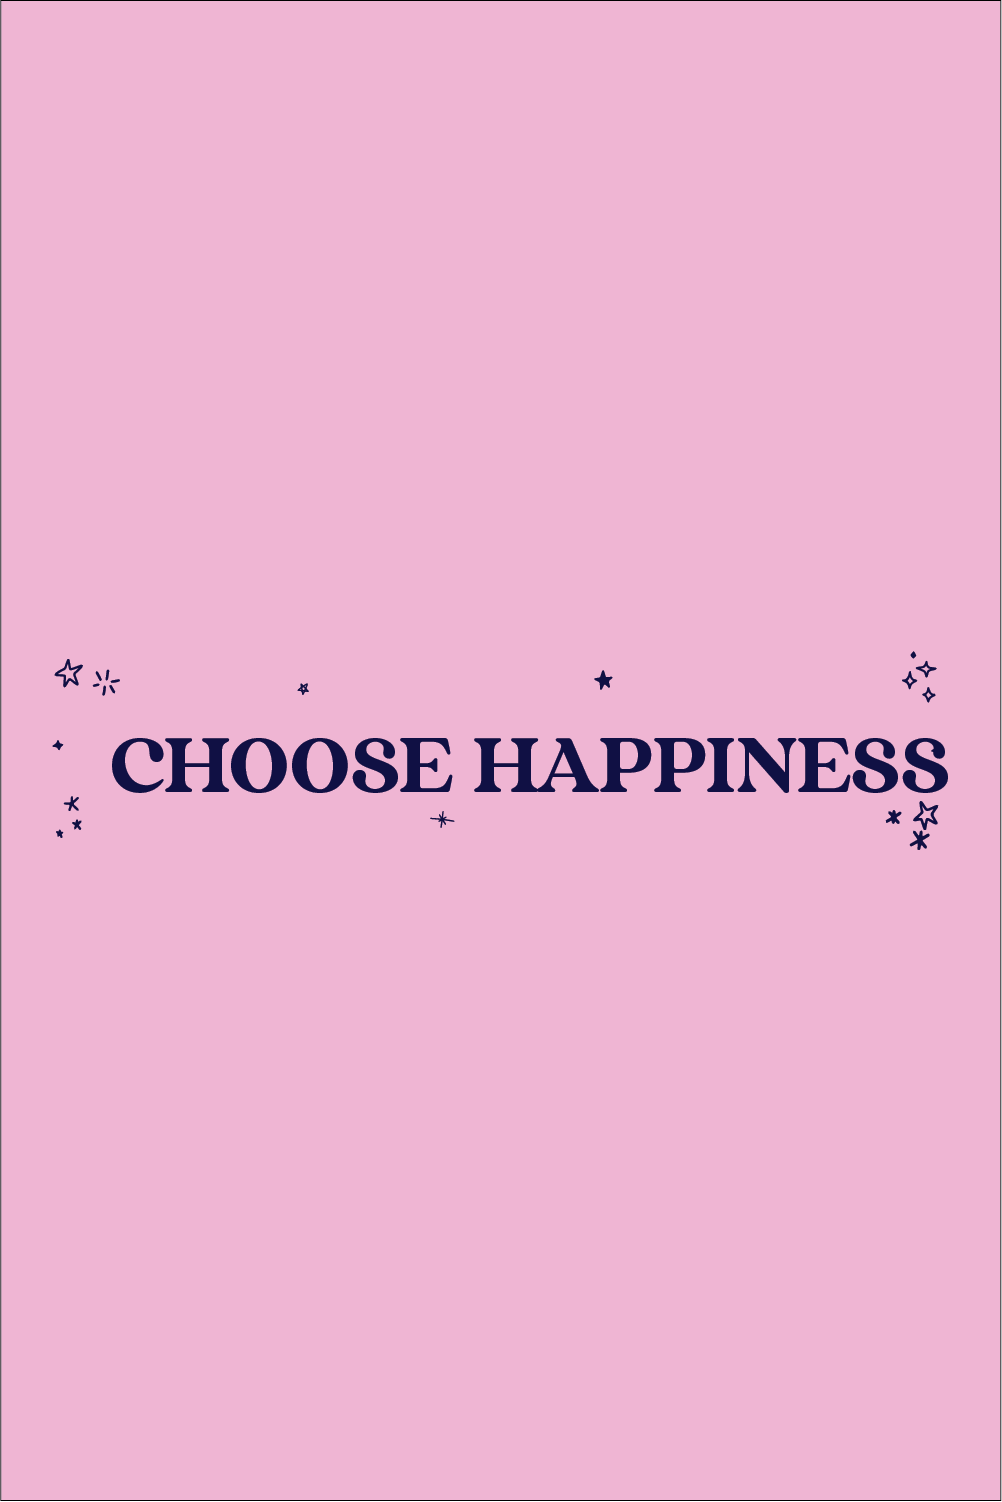 Choose Happiness Youth Hoodie